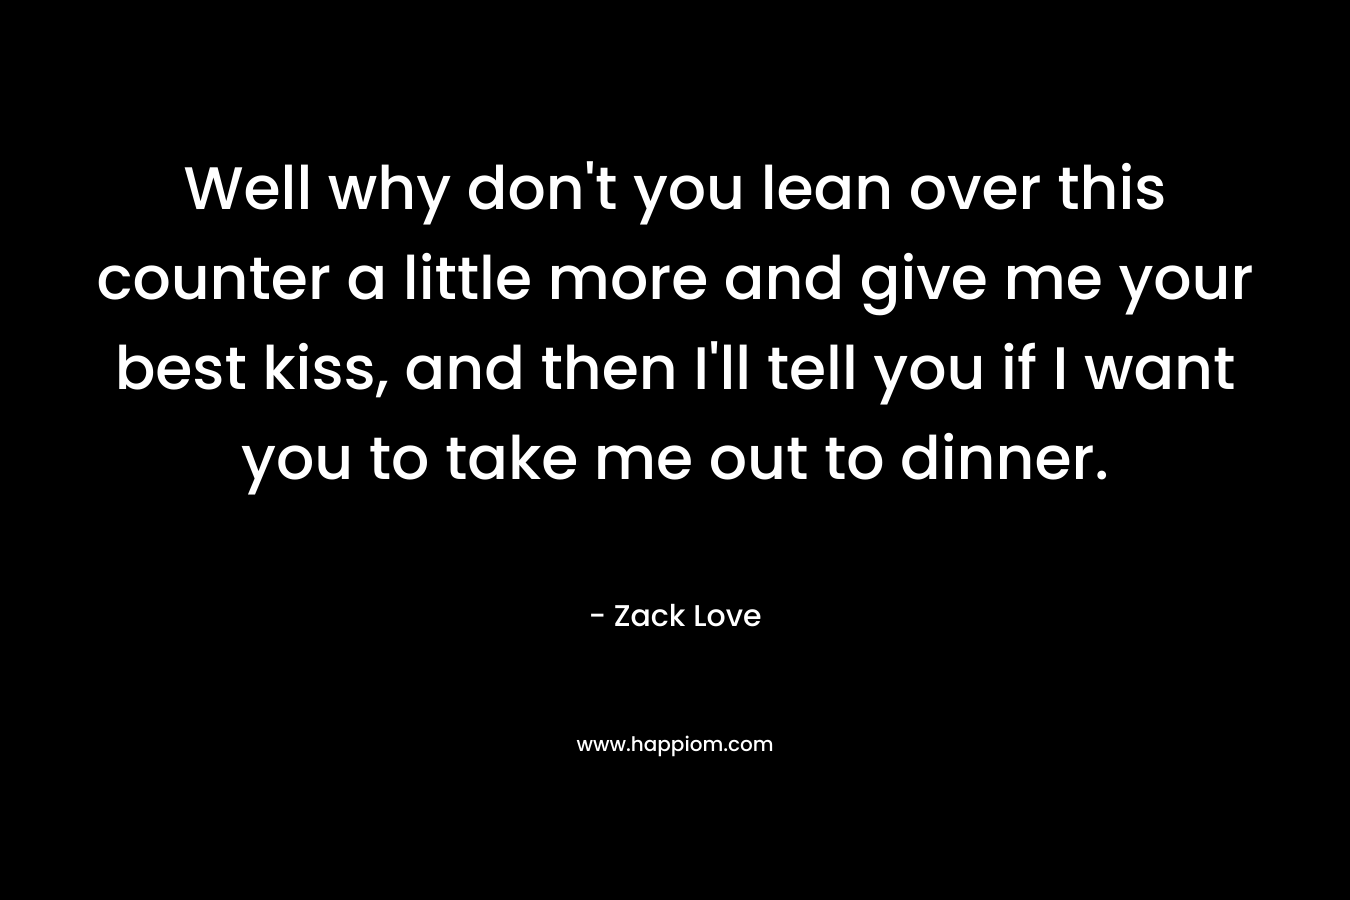 Well why don’t you lean over this counter a little more and give me your best kiss, and then I’ll tell you if I want you to take me out to dinner. – Zack Love